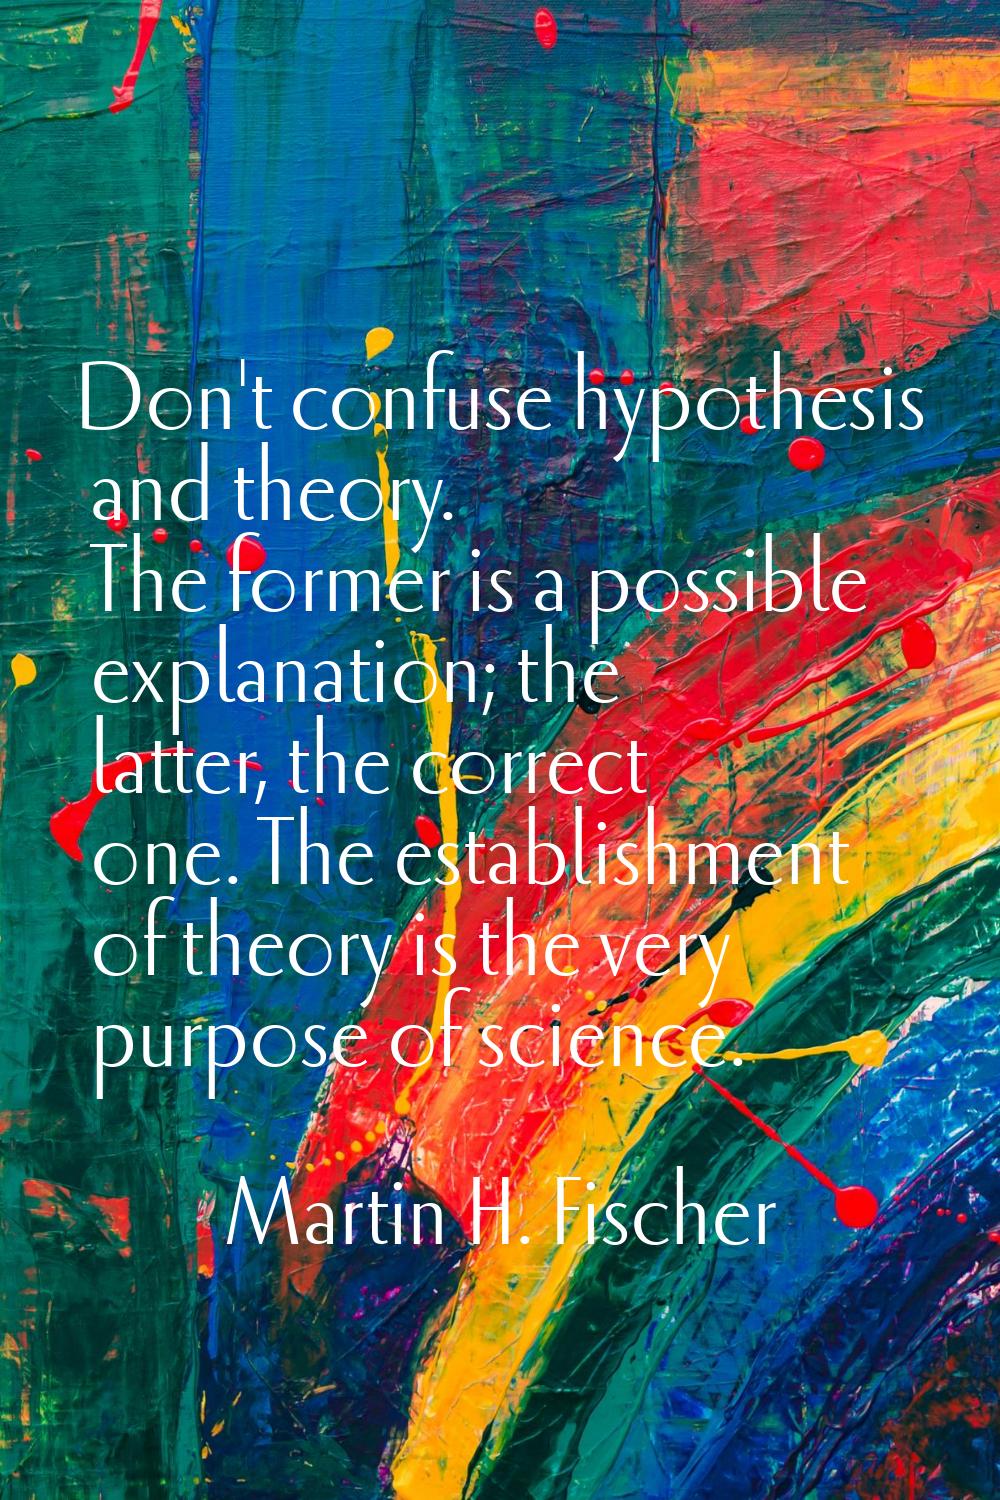 Don't confuse hypothesis and theory. The former is a possible explanation; the latter, the correct 